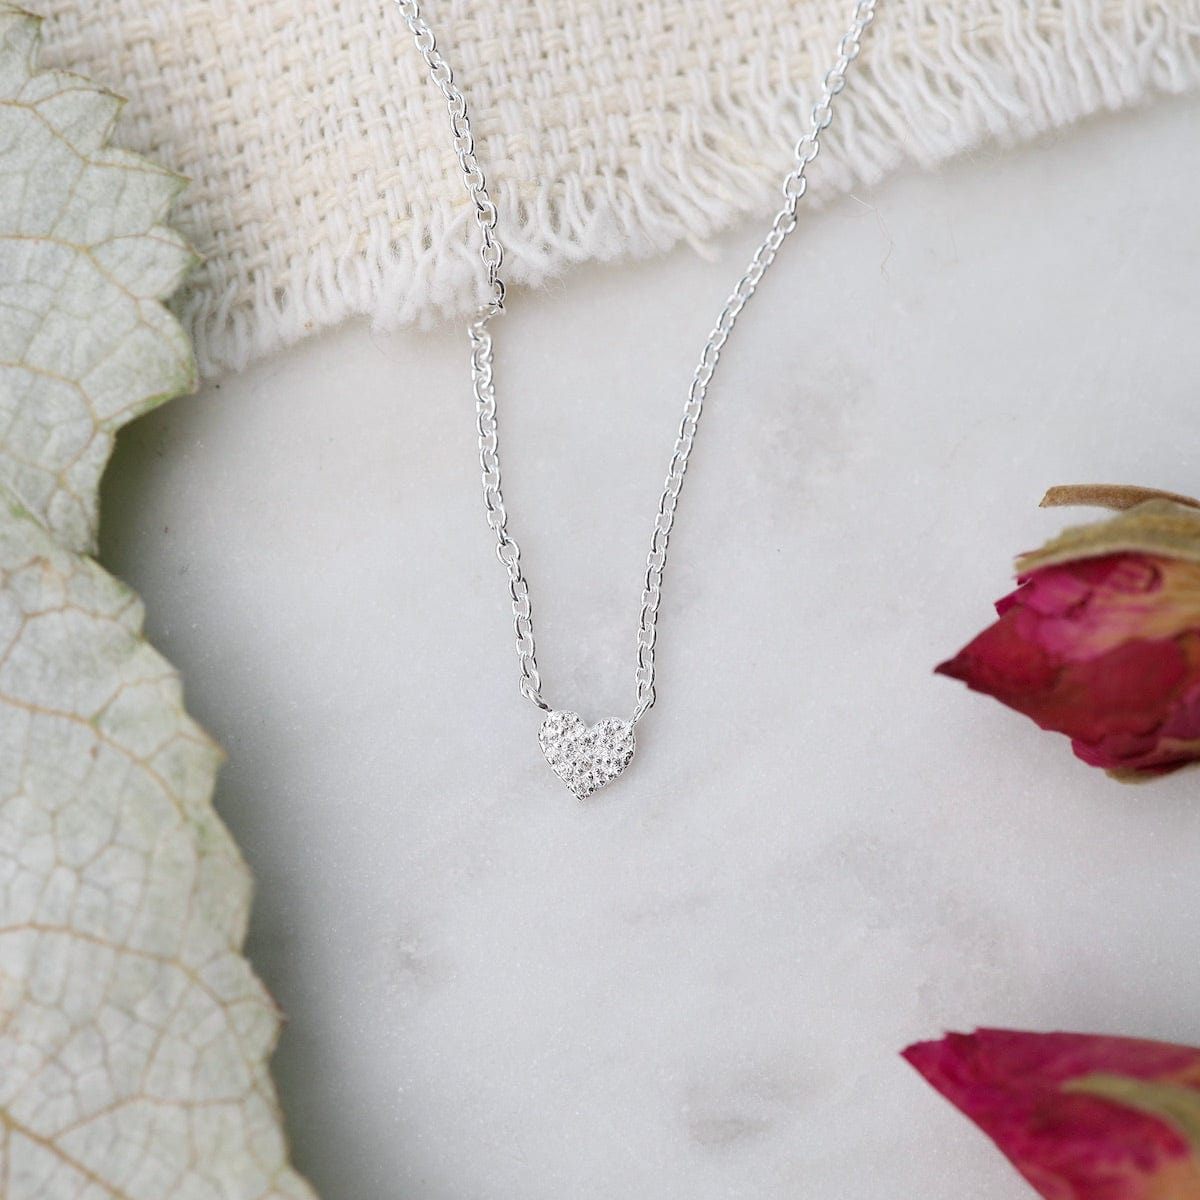 NKL Very Tiny Pave Heart Necklace in Sterling Silver